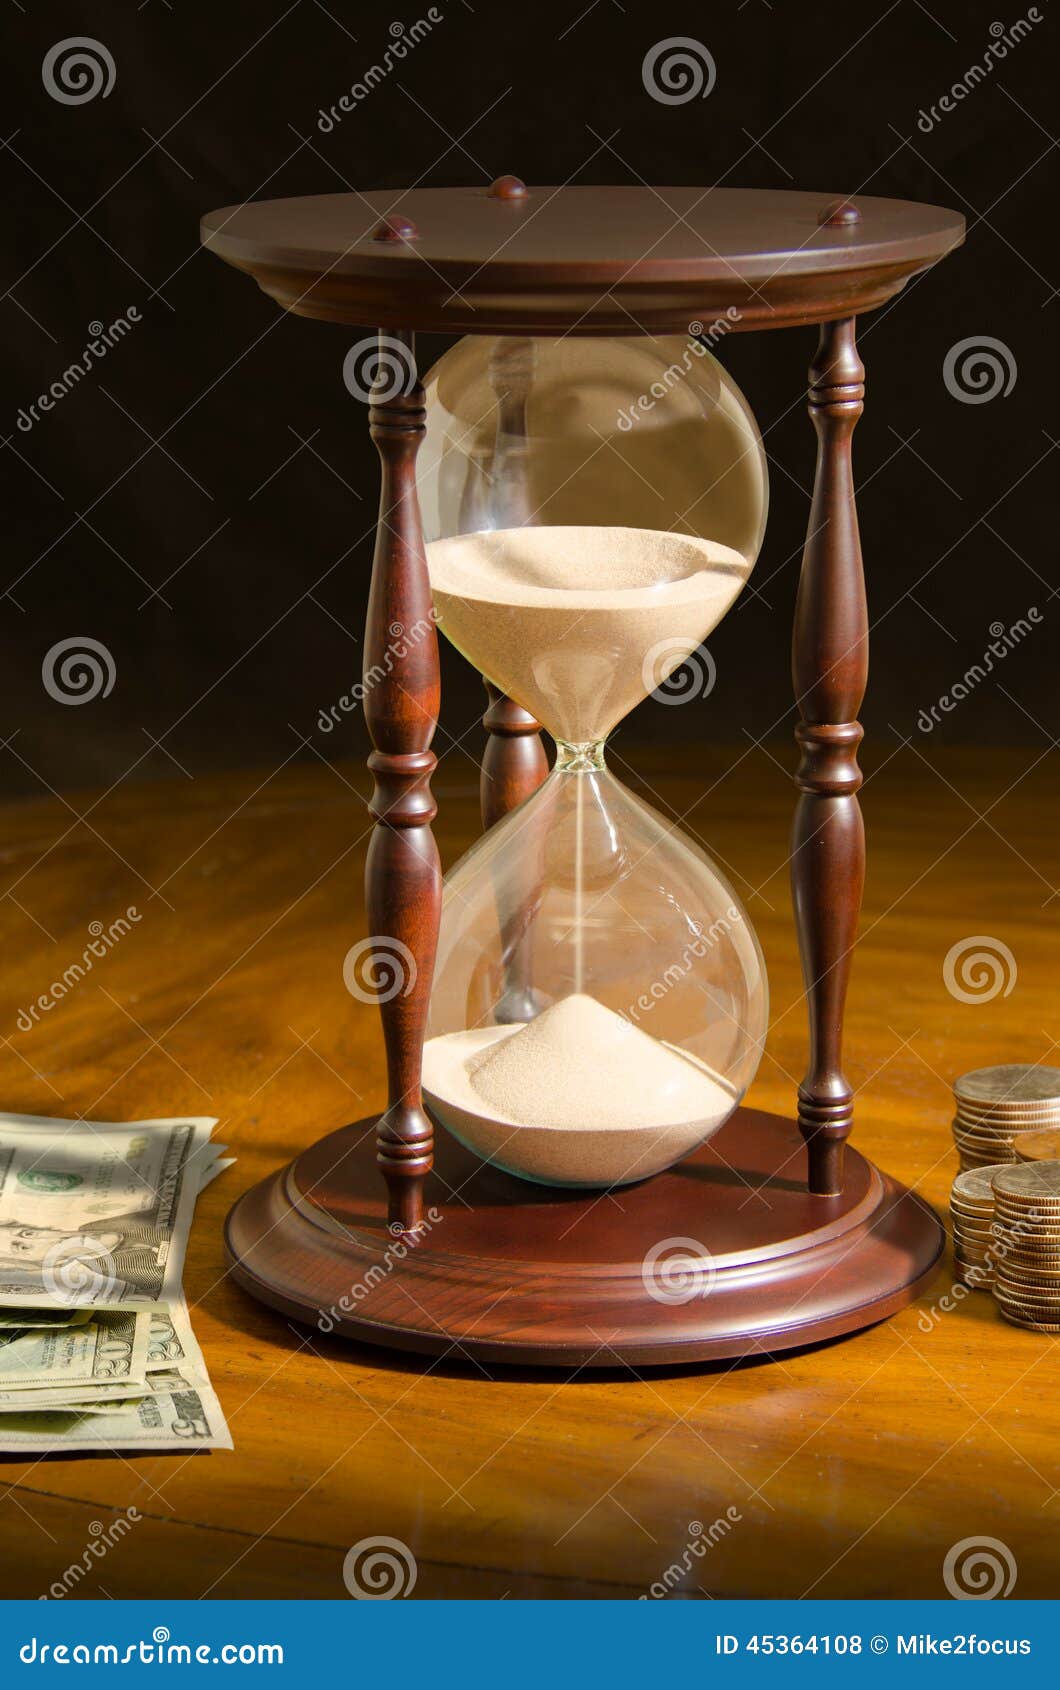 running out of time is money hour glass investment